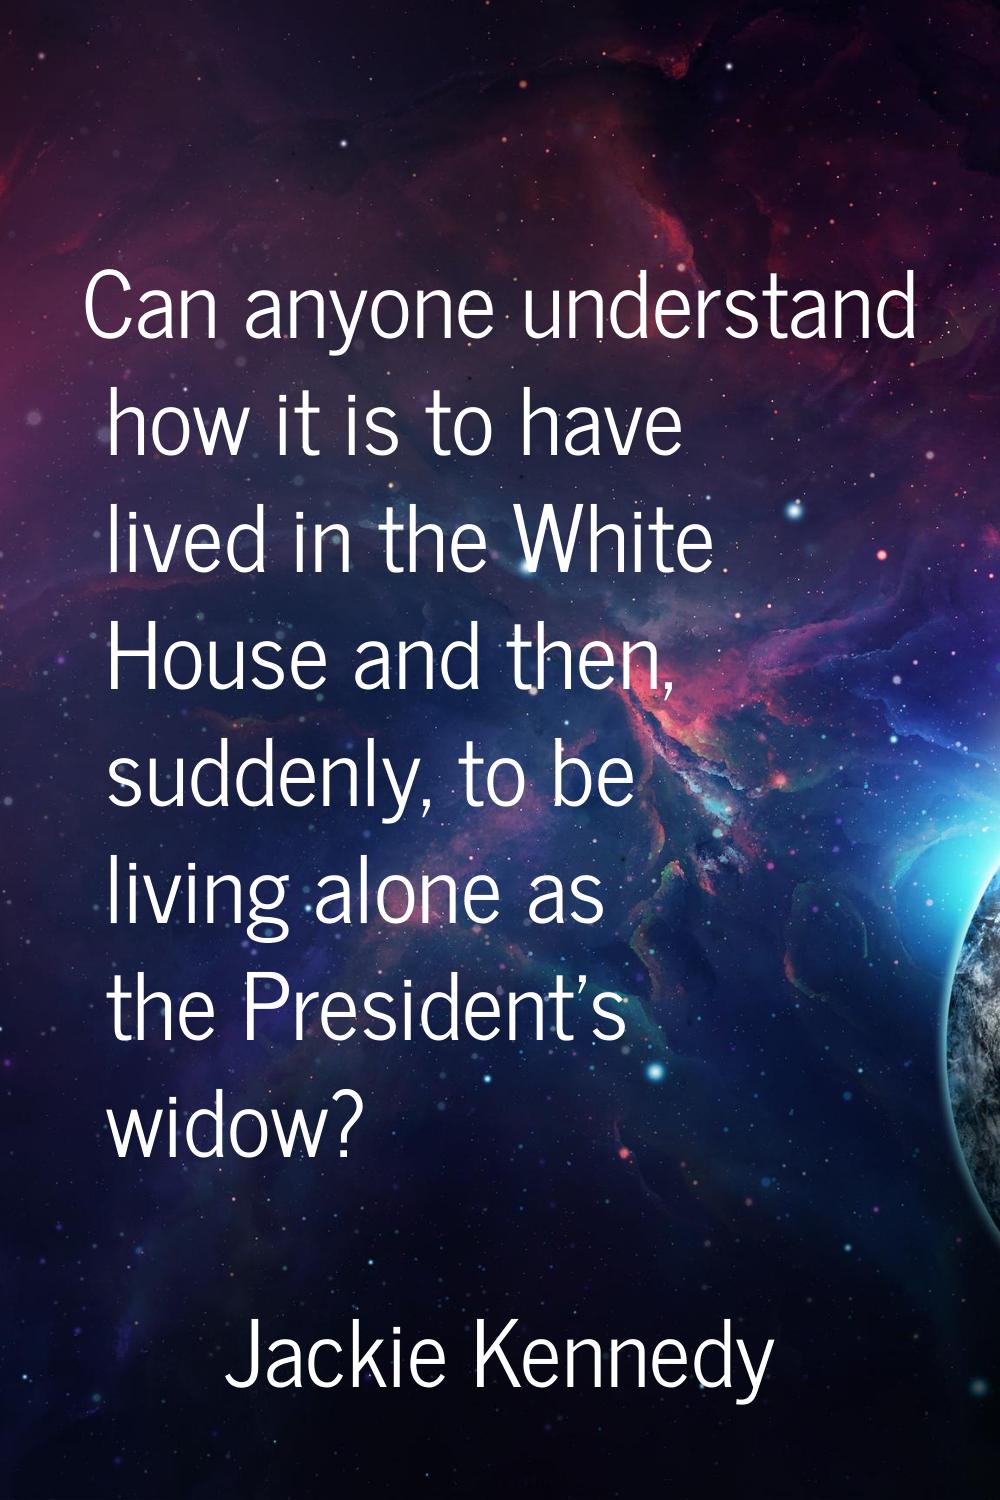 Can anyone understand how it is to have lived in the White House and then, suddenly, to be living a